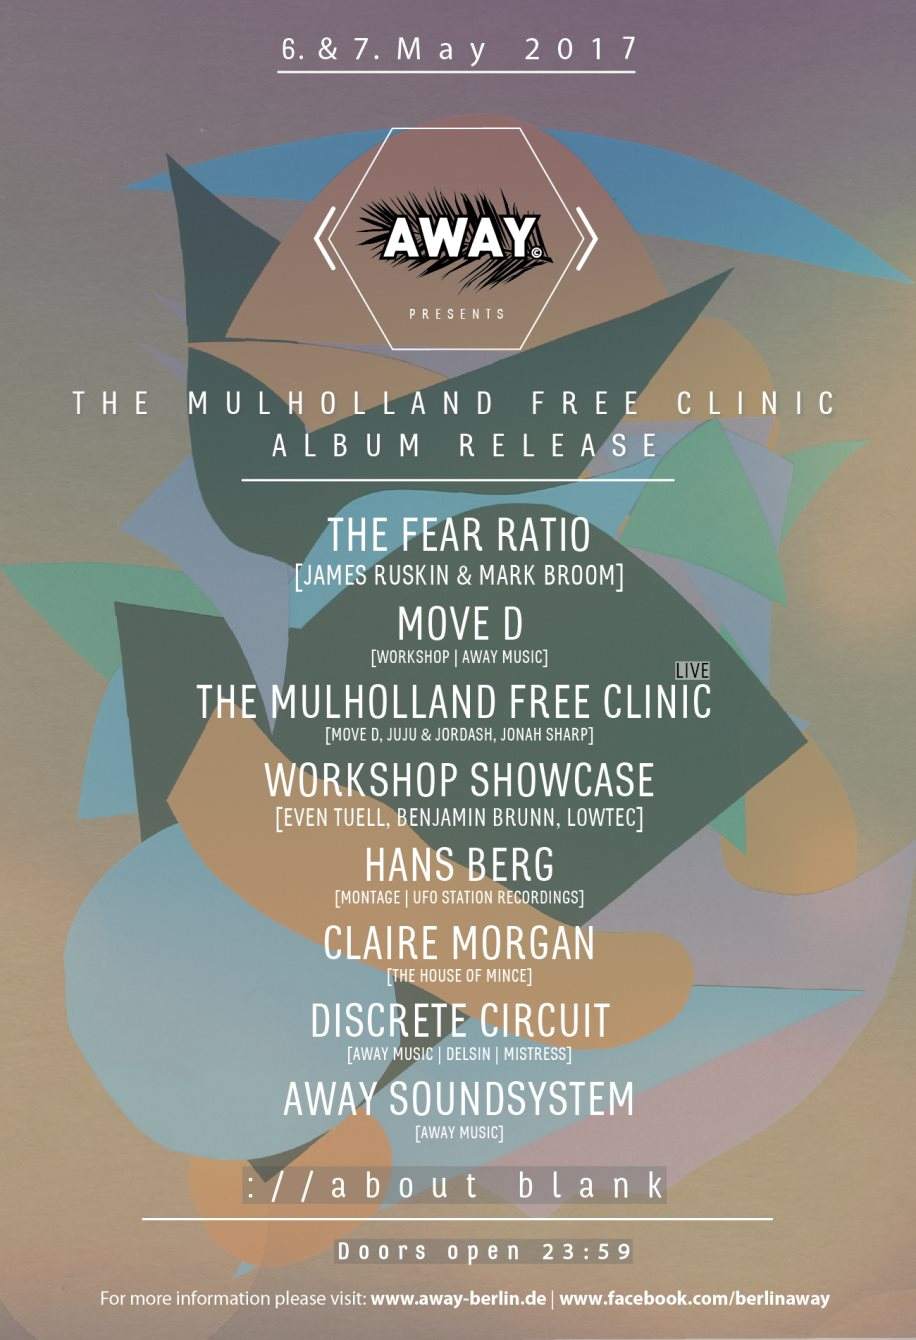 Away presents The Mulholland Free Clinic Album Release + James Ruskin & Mark Broom - フライヤー裏